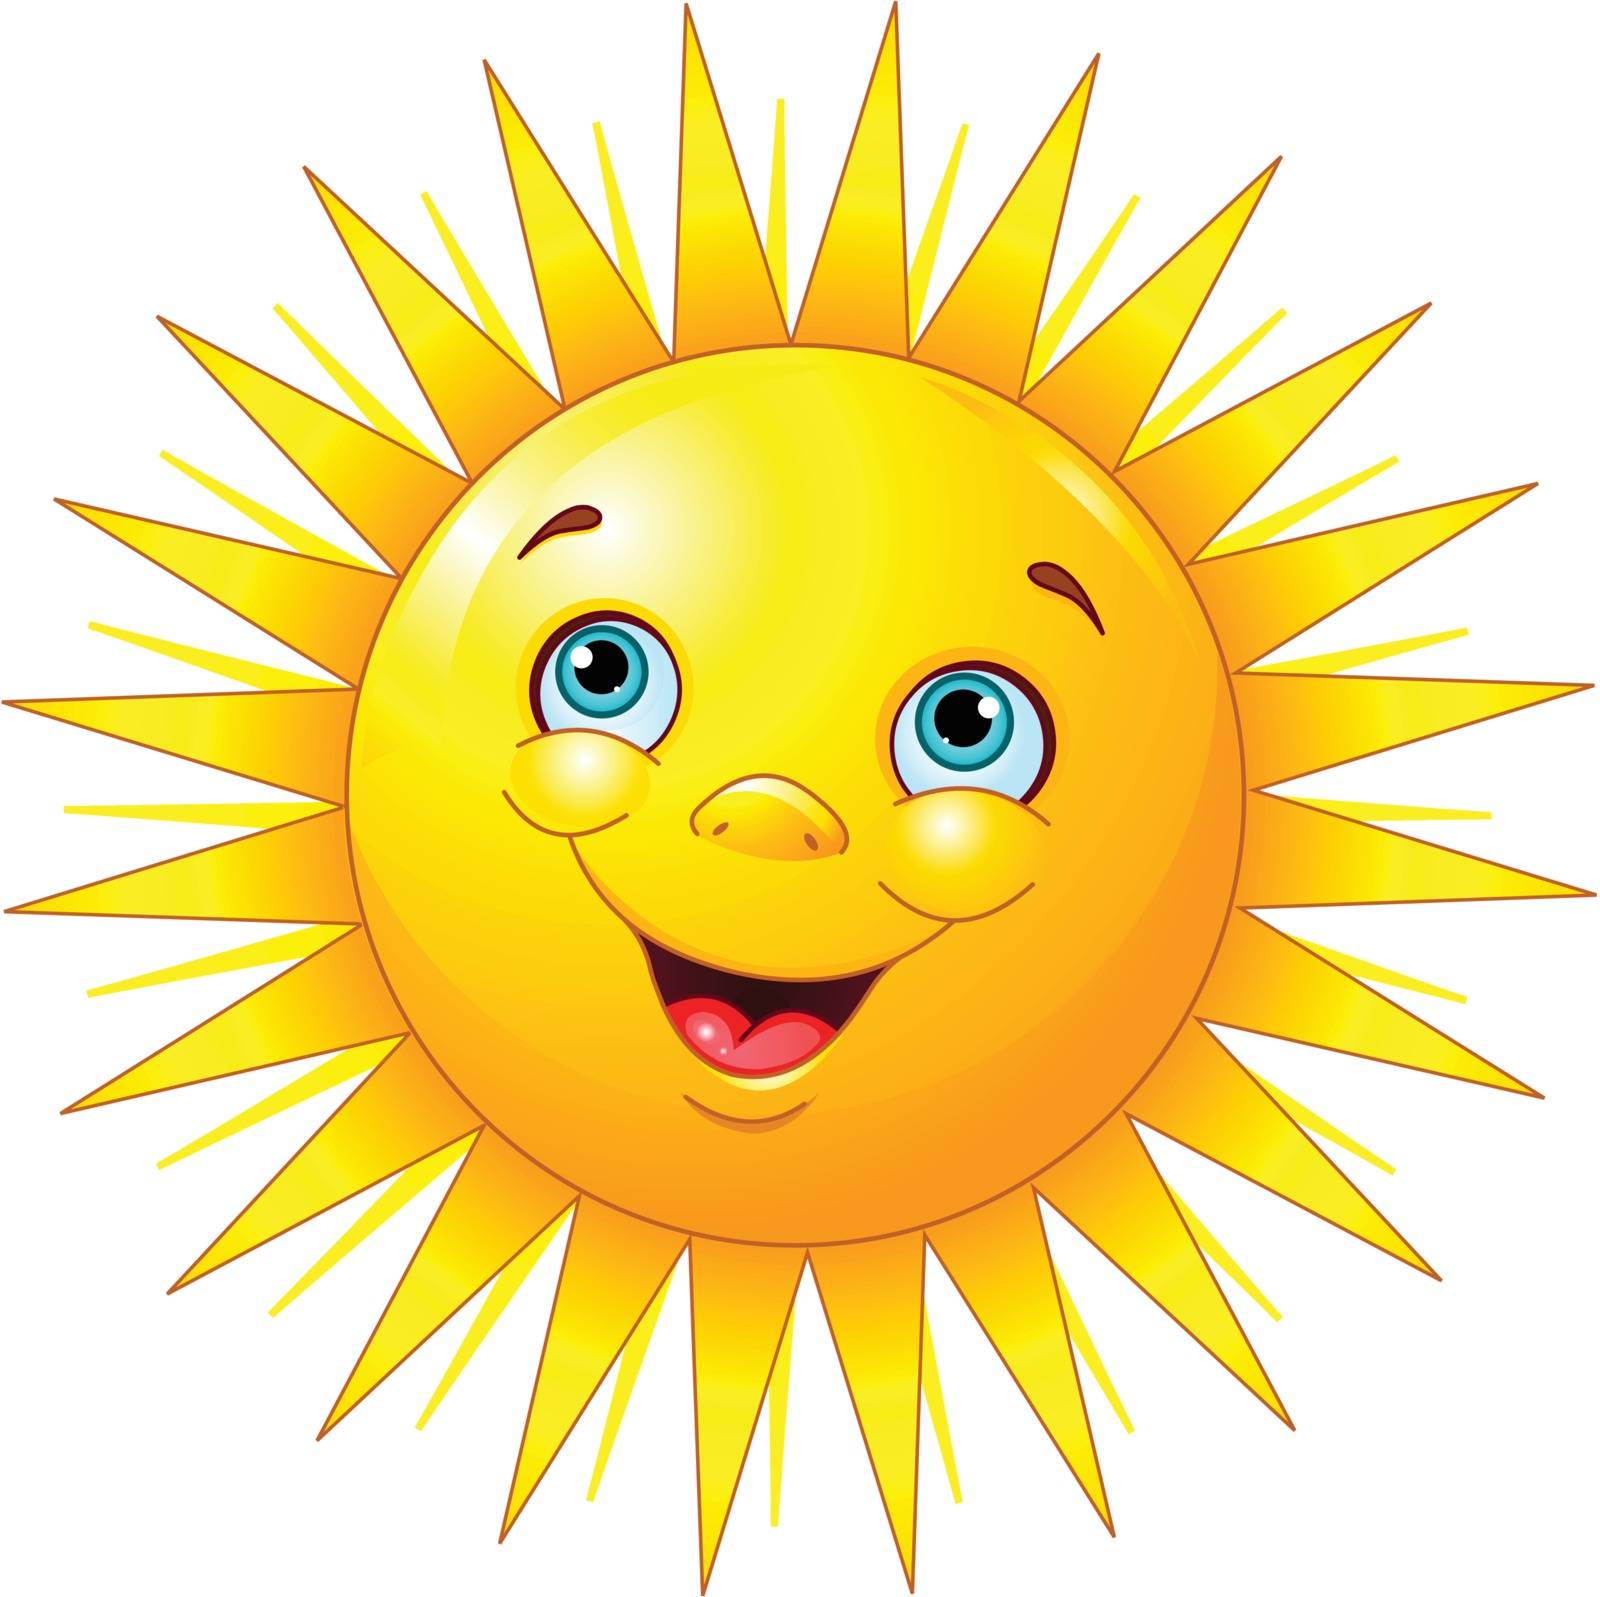 Illustration of smiling sun character